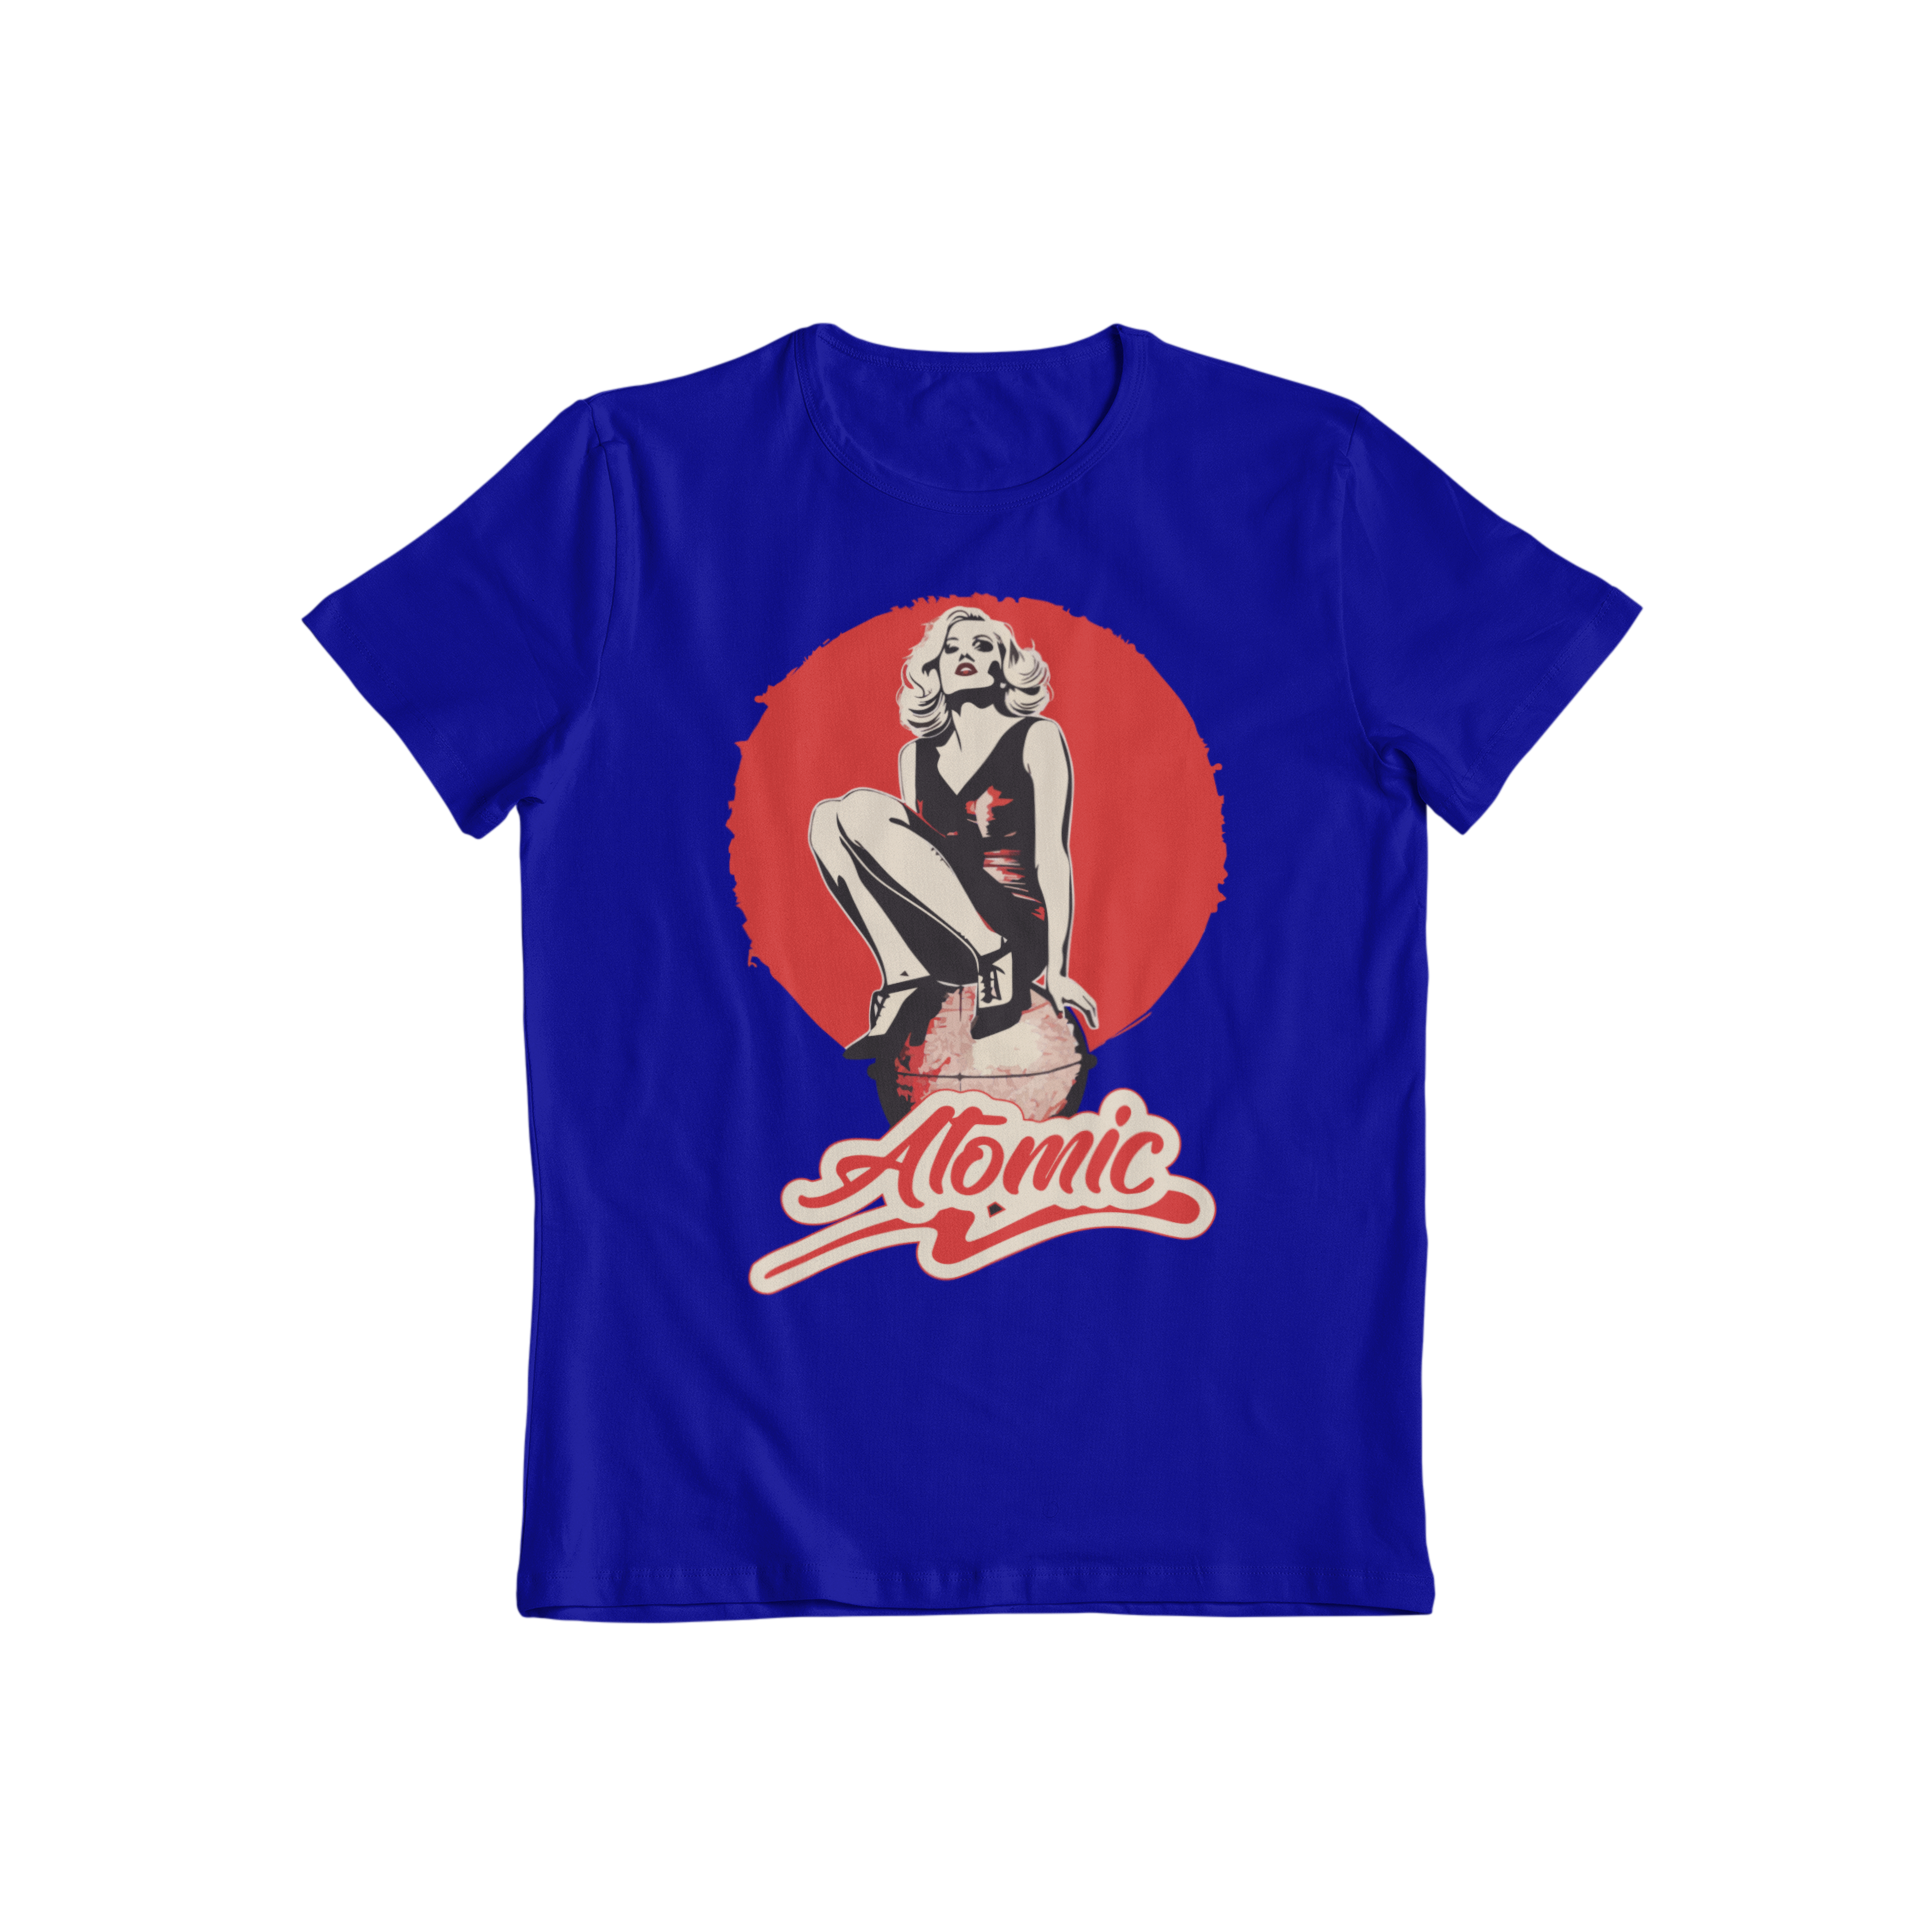 Introducing the Atomic T-shirt, a classic tee that will rock your world just like Blondie's hit song! With its iconic design and killer style, this shirt is perfect for all music lovers. Bring some atomic energy to your wardrobe and unleash your inner rocker.